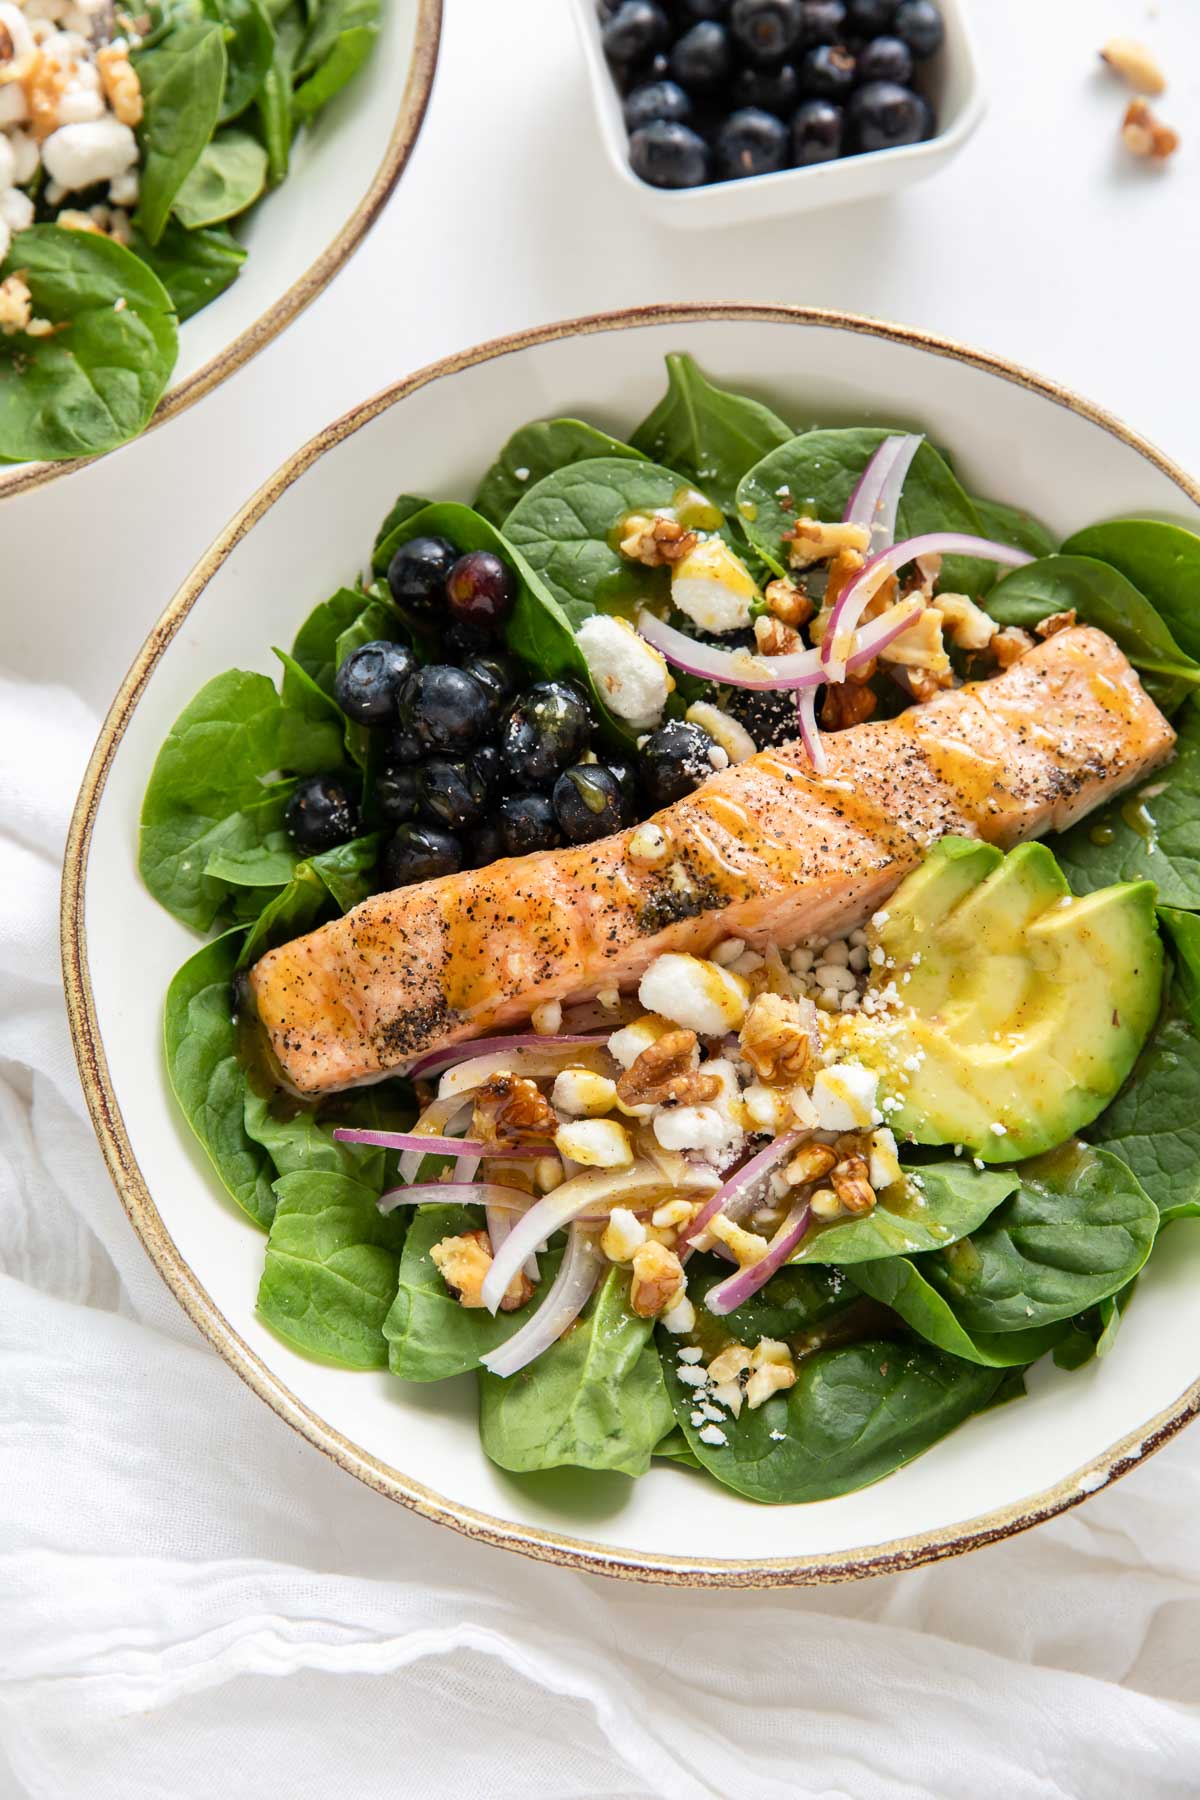 salmon salad with spinach, avocado, red onion, walnuts and goat cheese